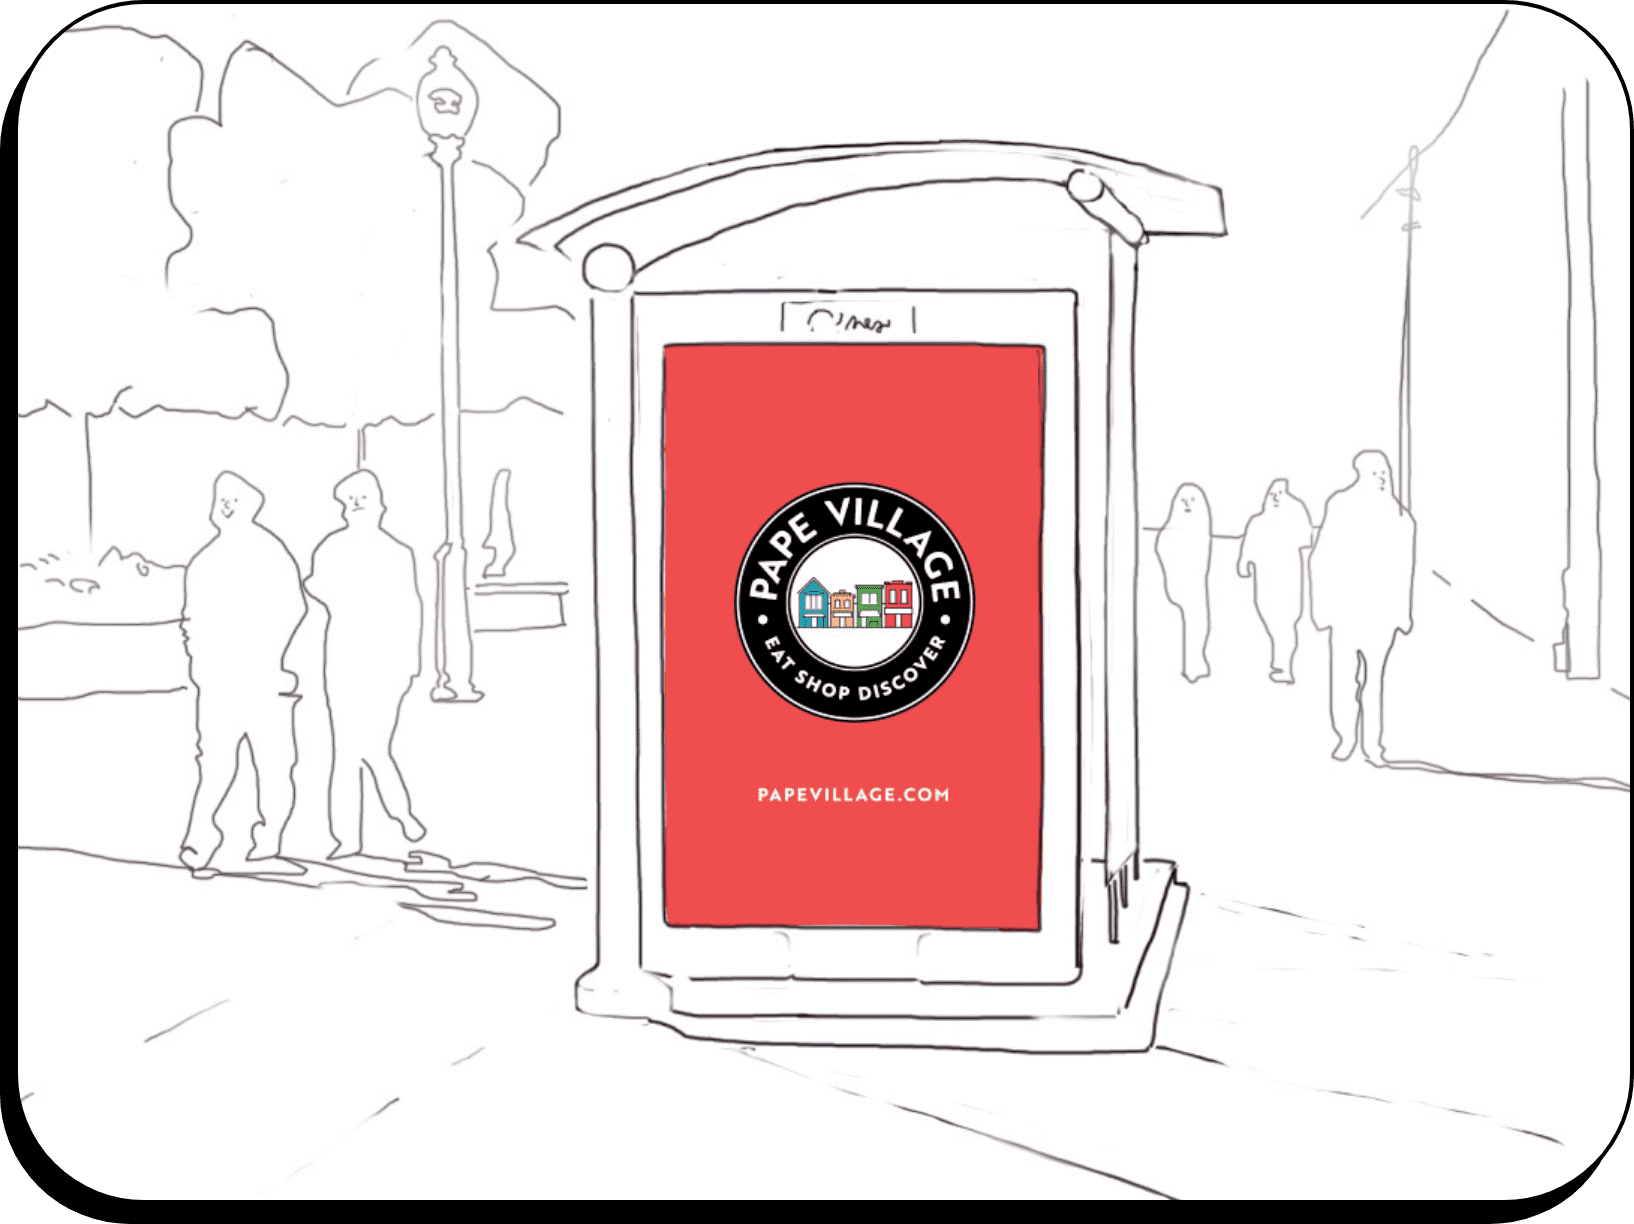 Graphic of a bus shelter showcasing the Pape Village logo as a representational image of Logo and Branding Services.